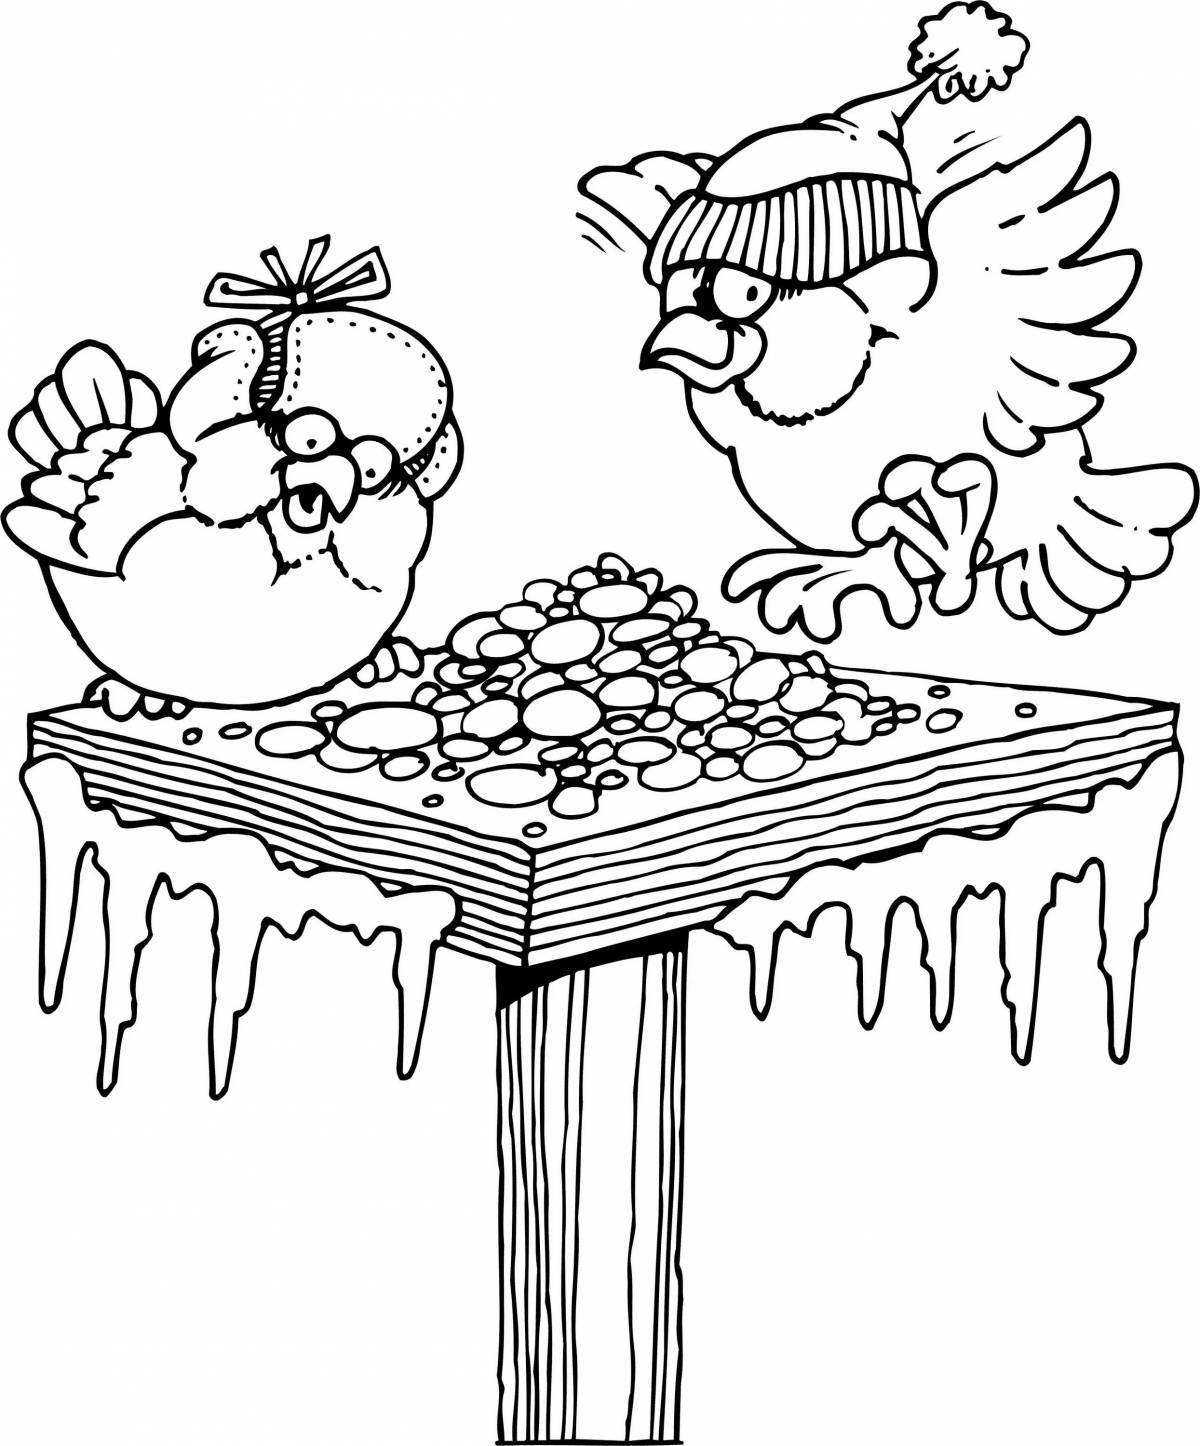 Fun feed the birds in winter drawing for children 6-7 years old